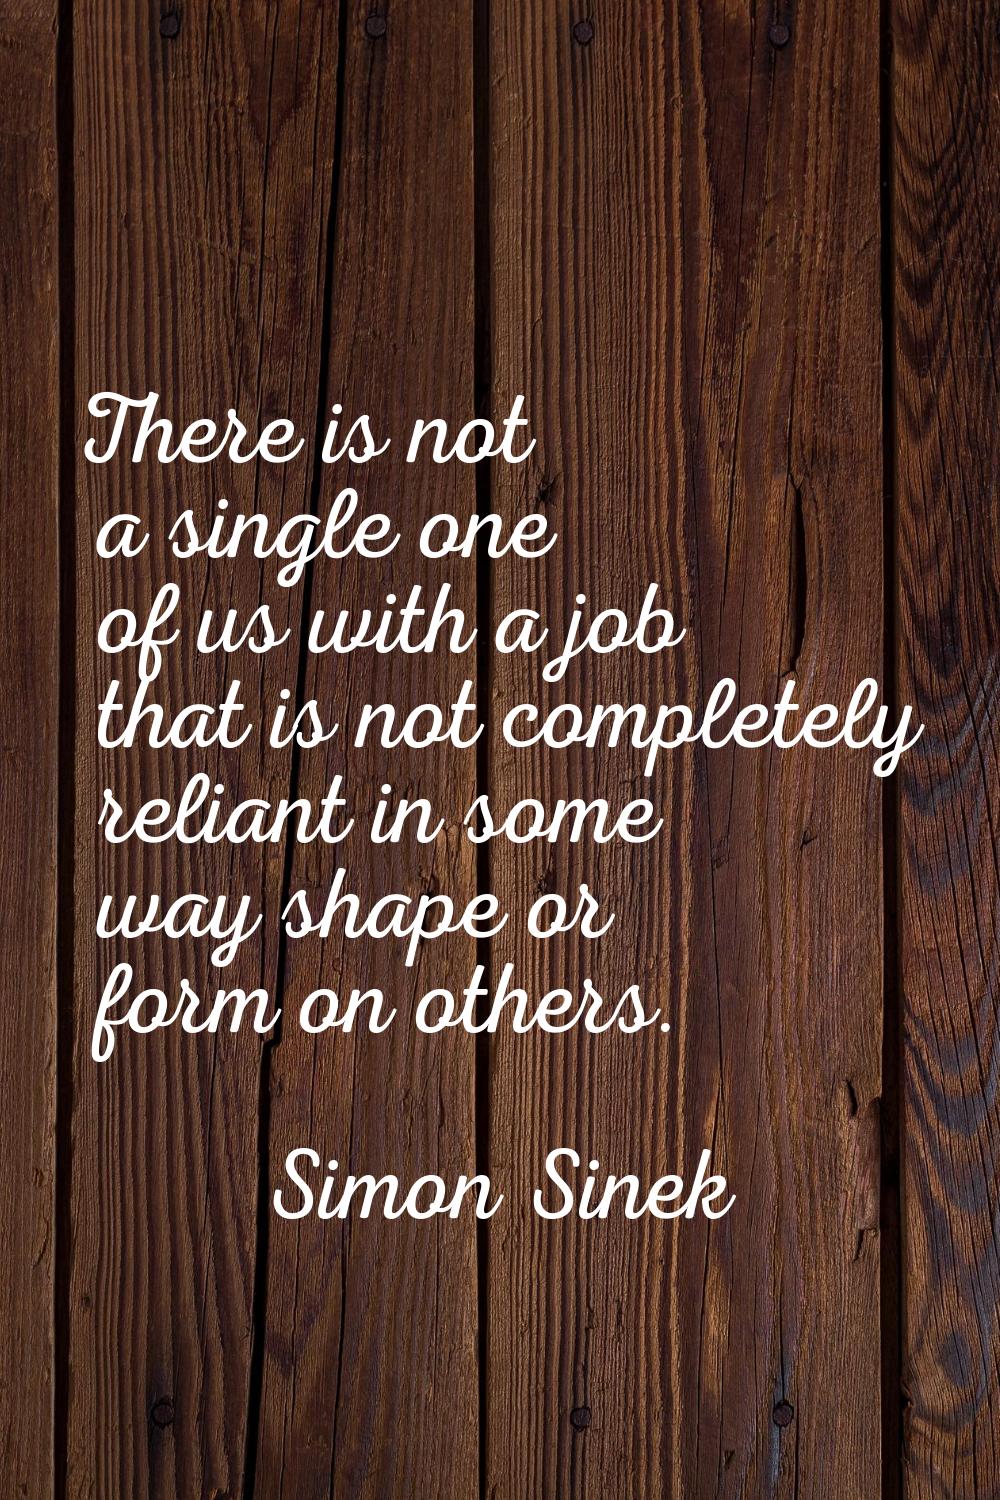 There is not a single one of us with a job that is not completely reliant in some way shape or form